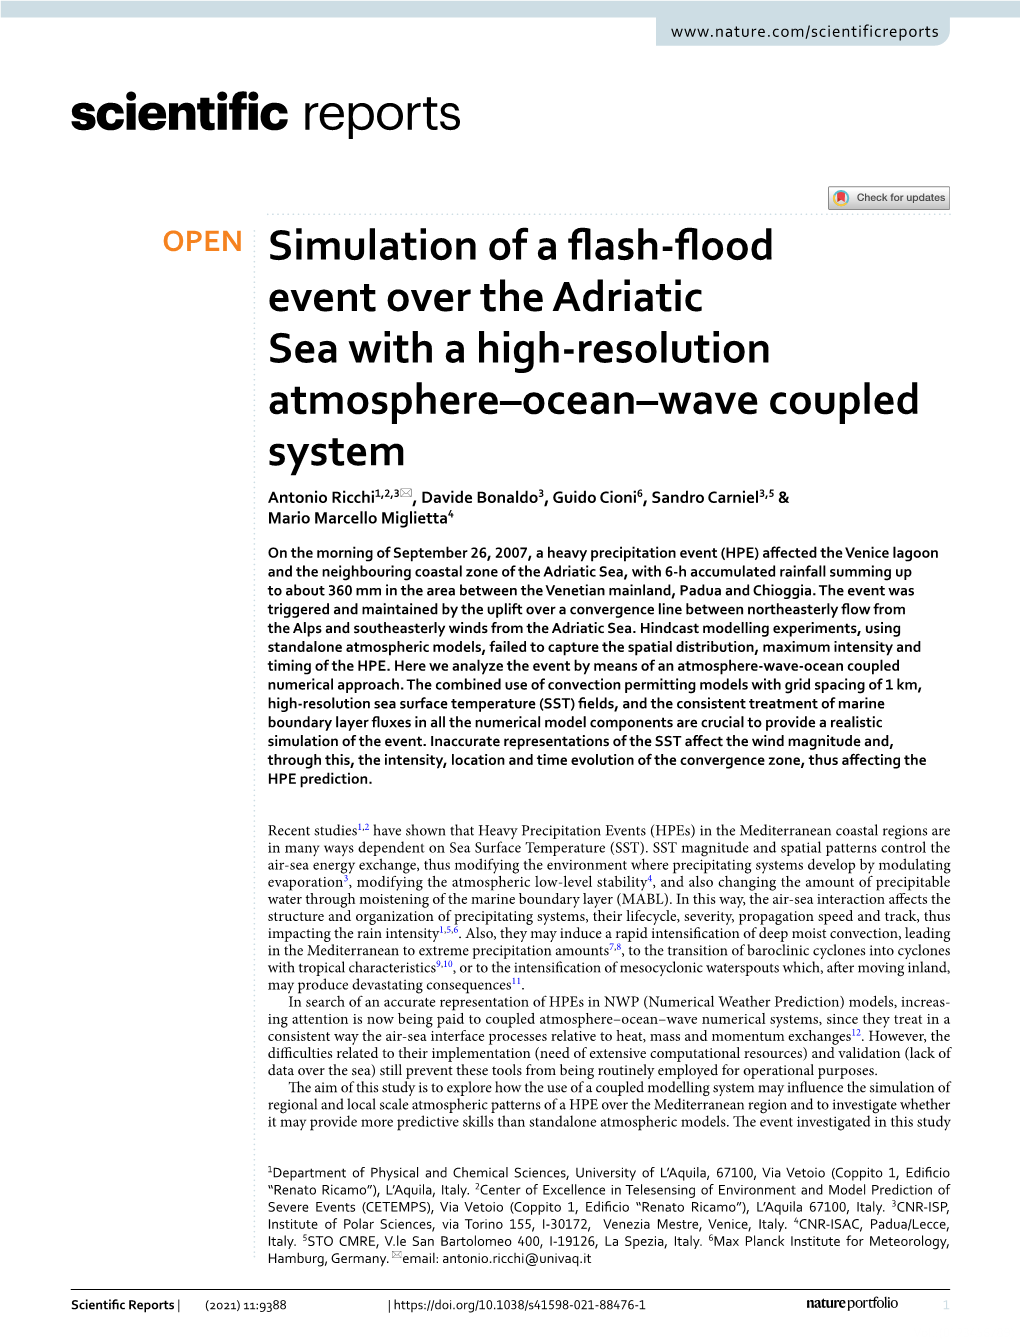 Simulation of a Flash-Flood Event Over the Adriatic Sea with a High